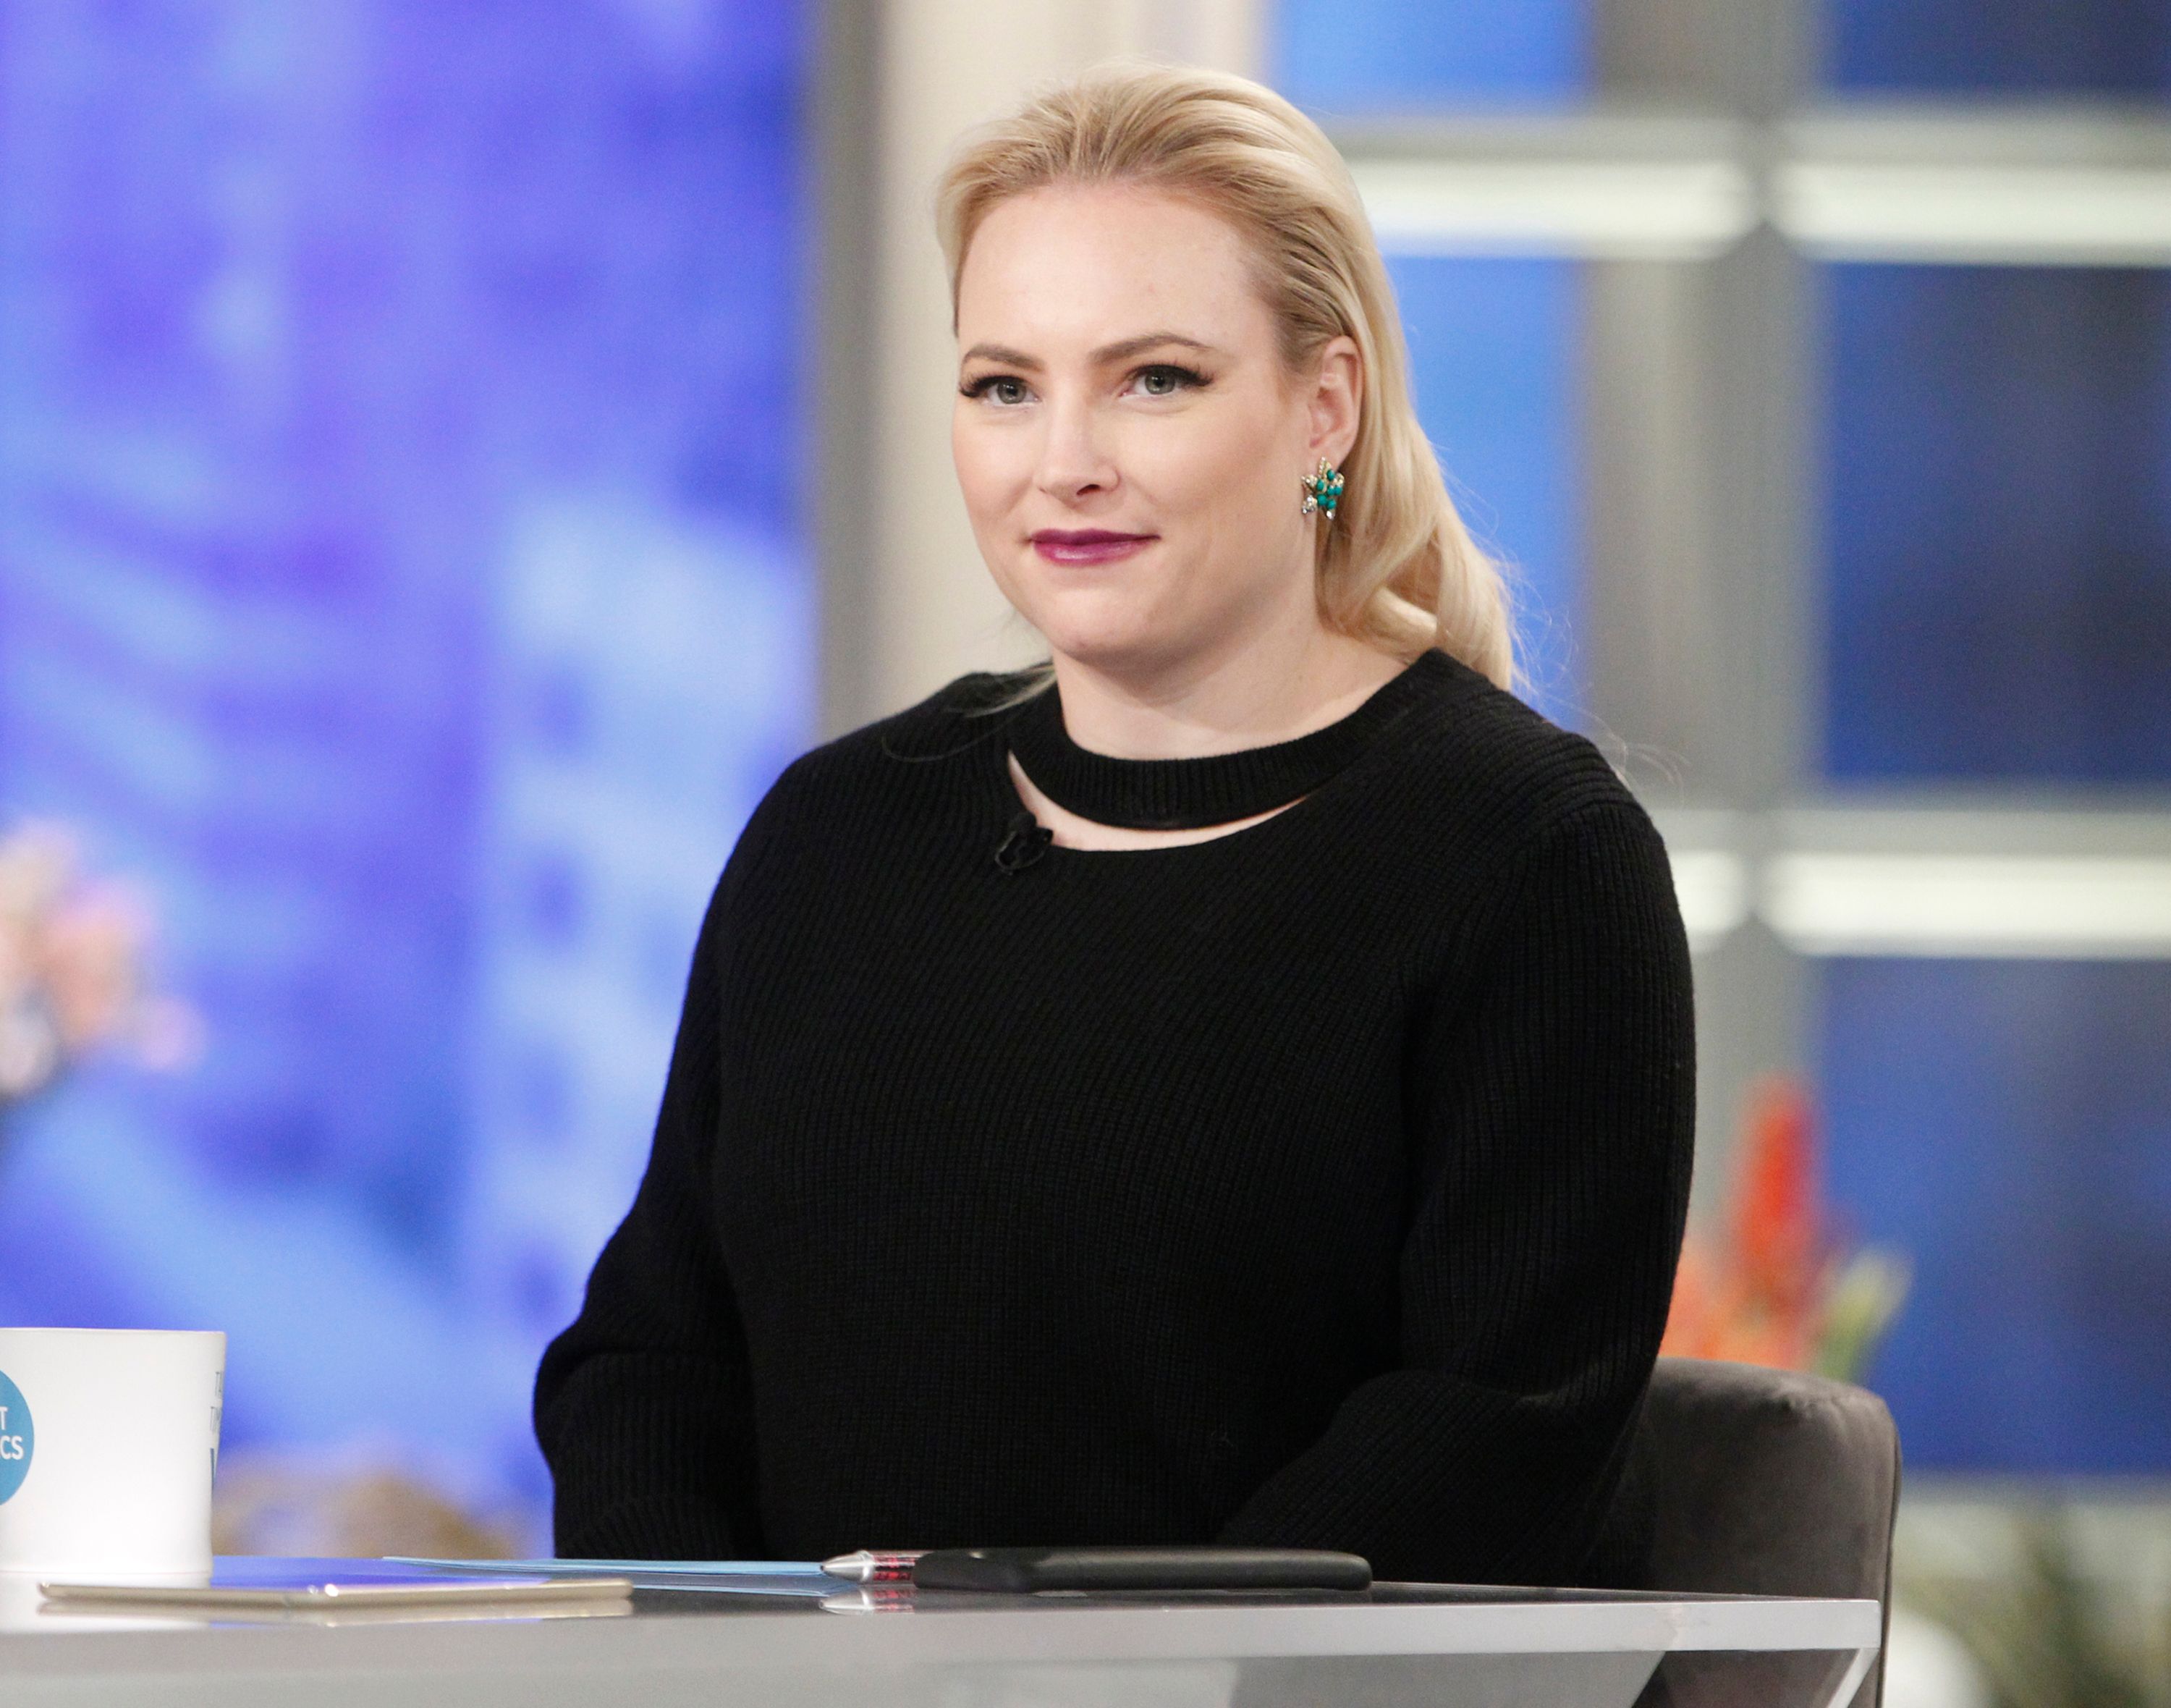 Meghan McCain on season 21 of ABC's "The View" on January 8, 2018 | Photo: Getty Images